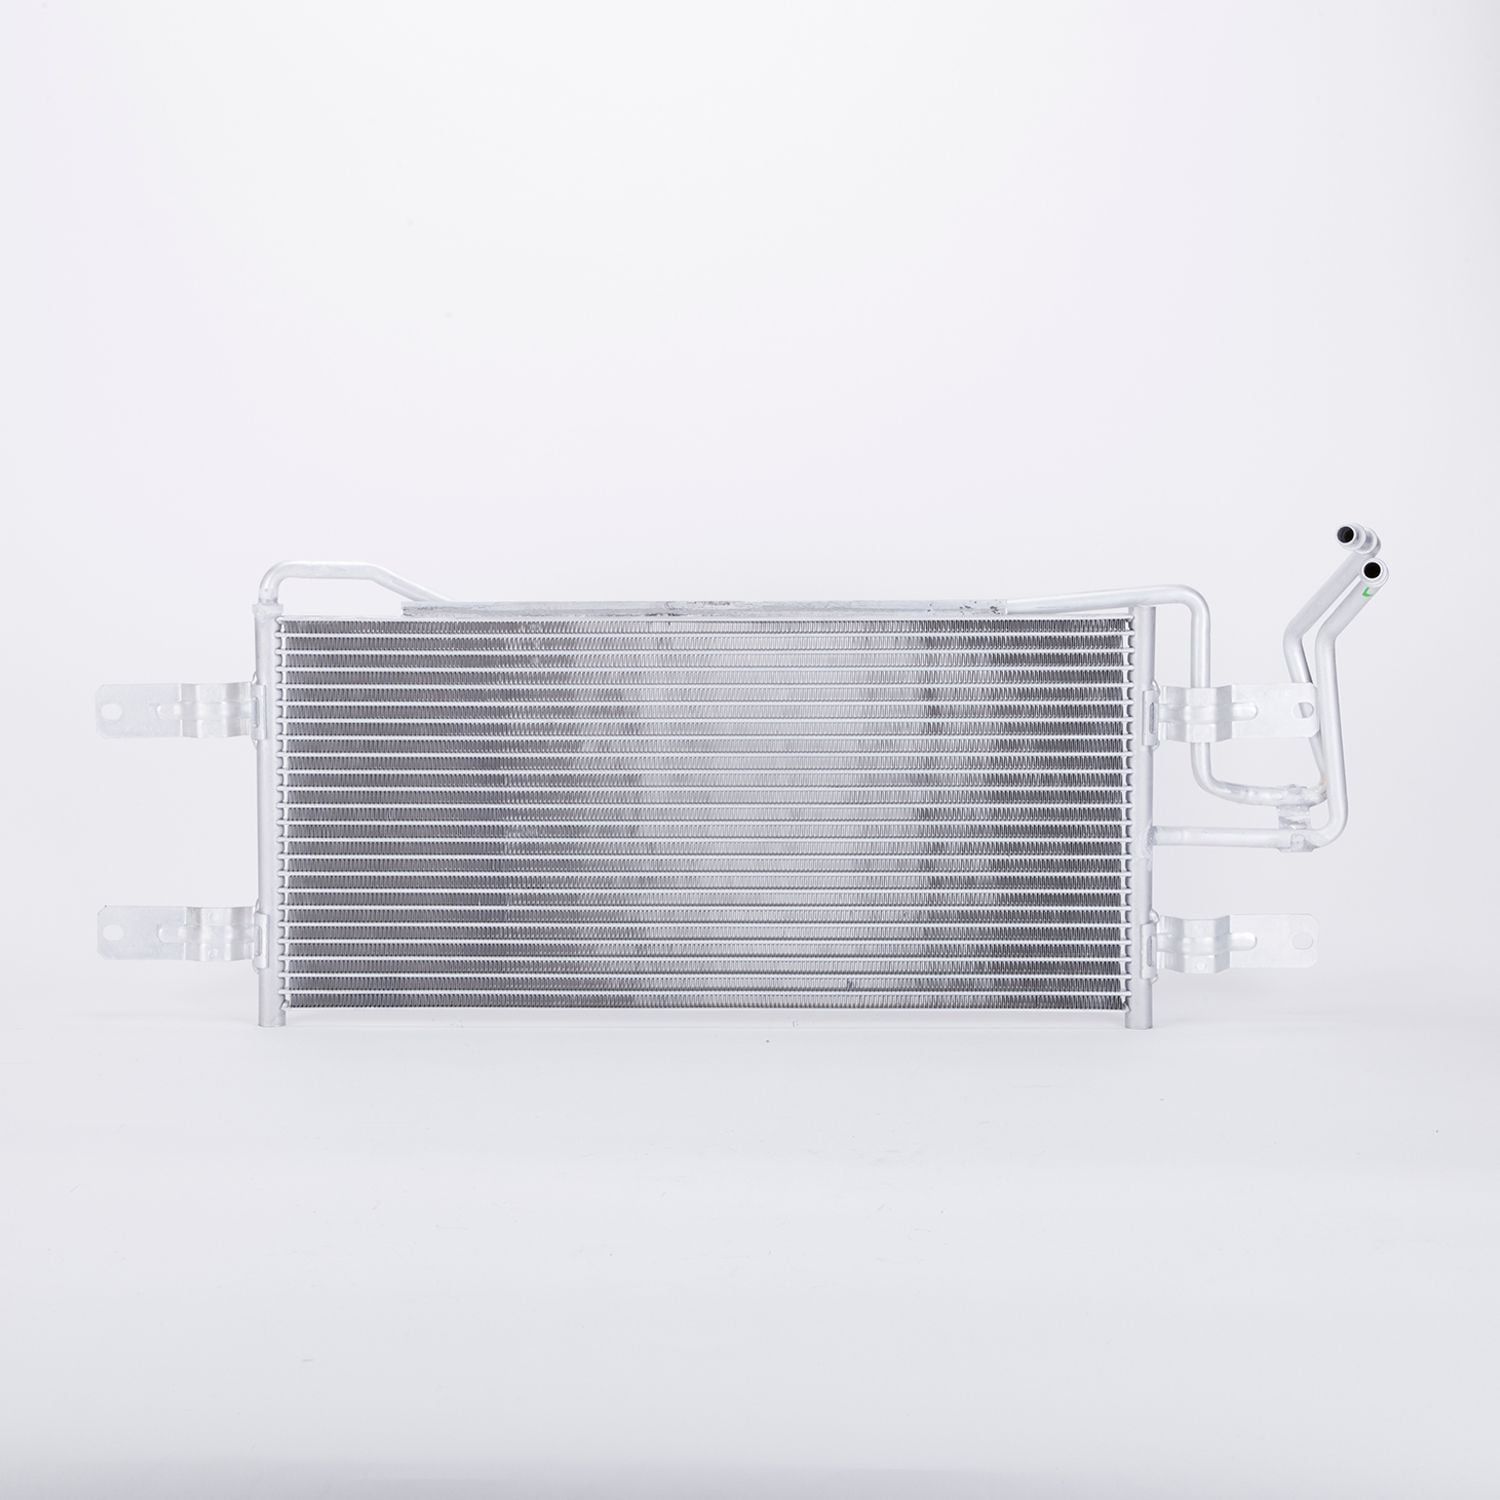 Radiator oo Hayden Automatic Transmission Oil Cooler for 2011 Ram 2500 